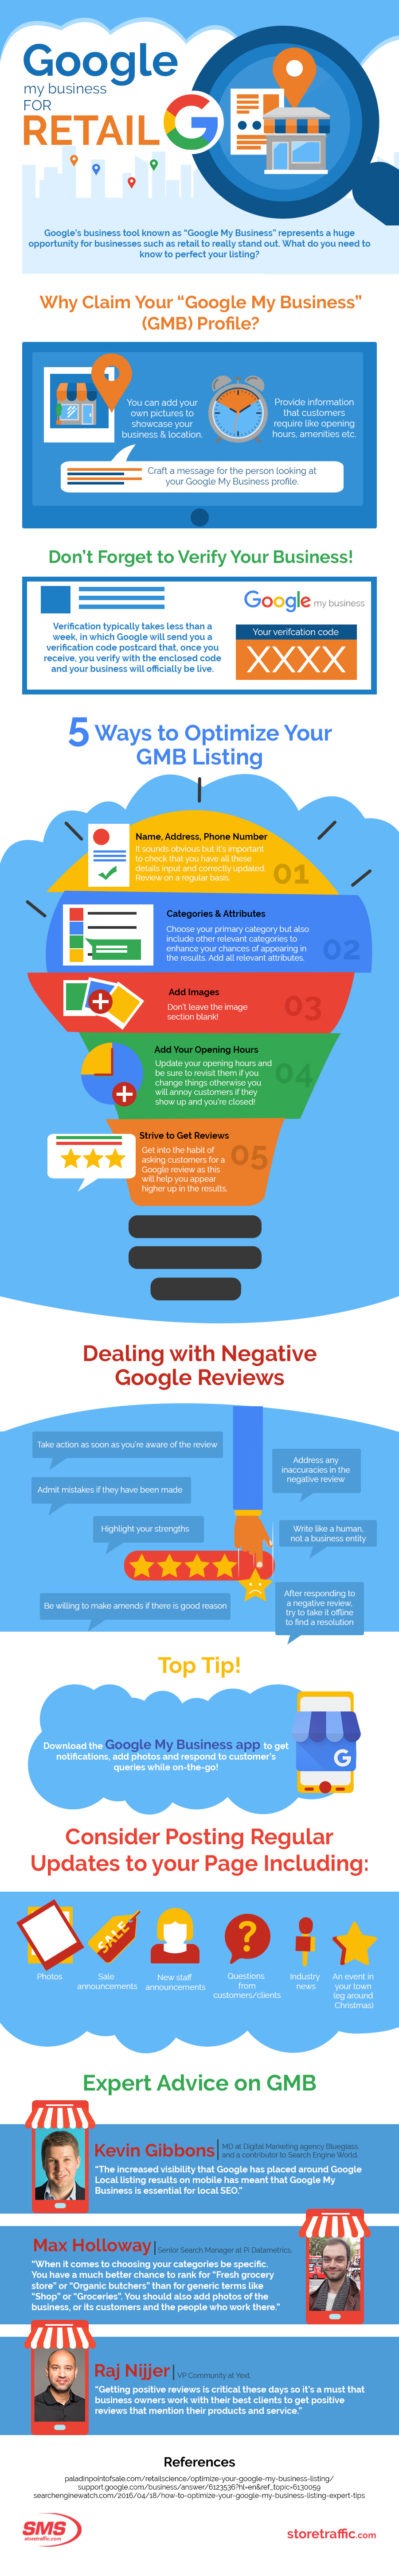 Google My Business Infographic